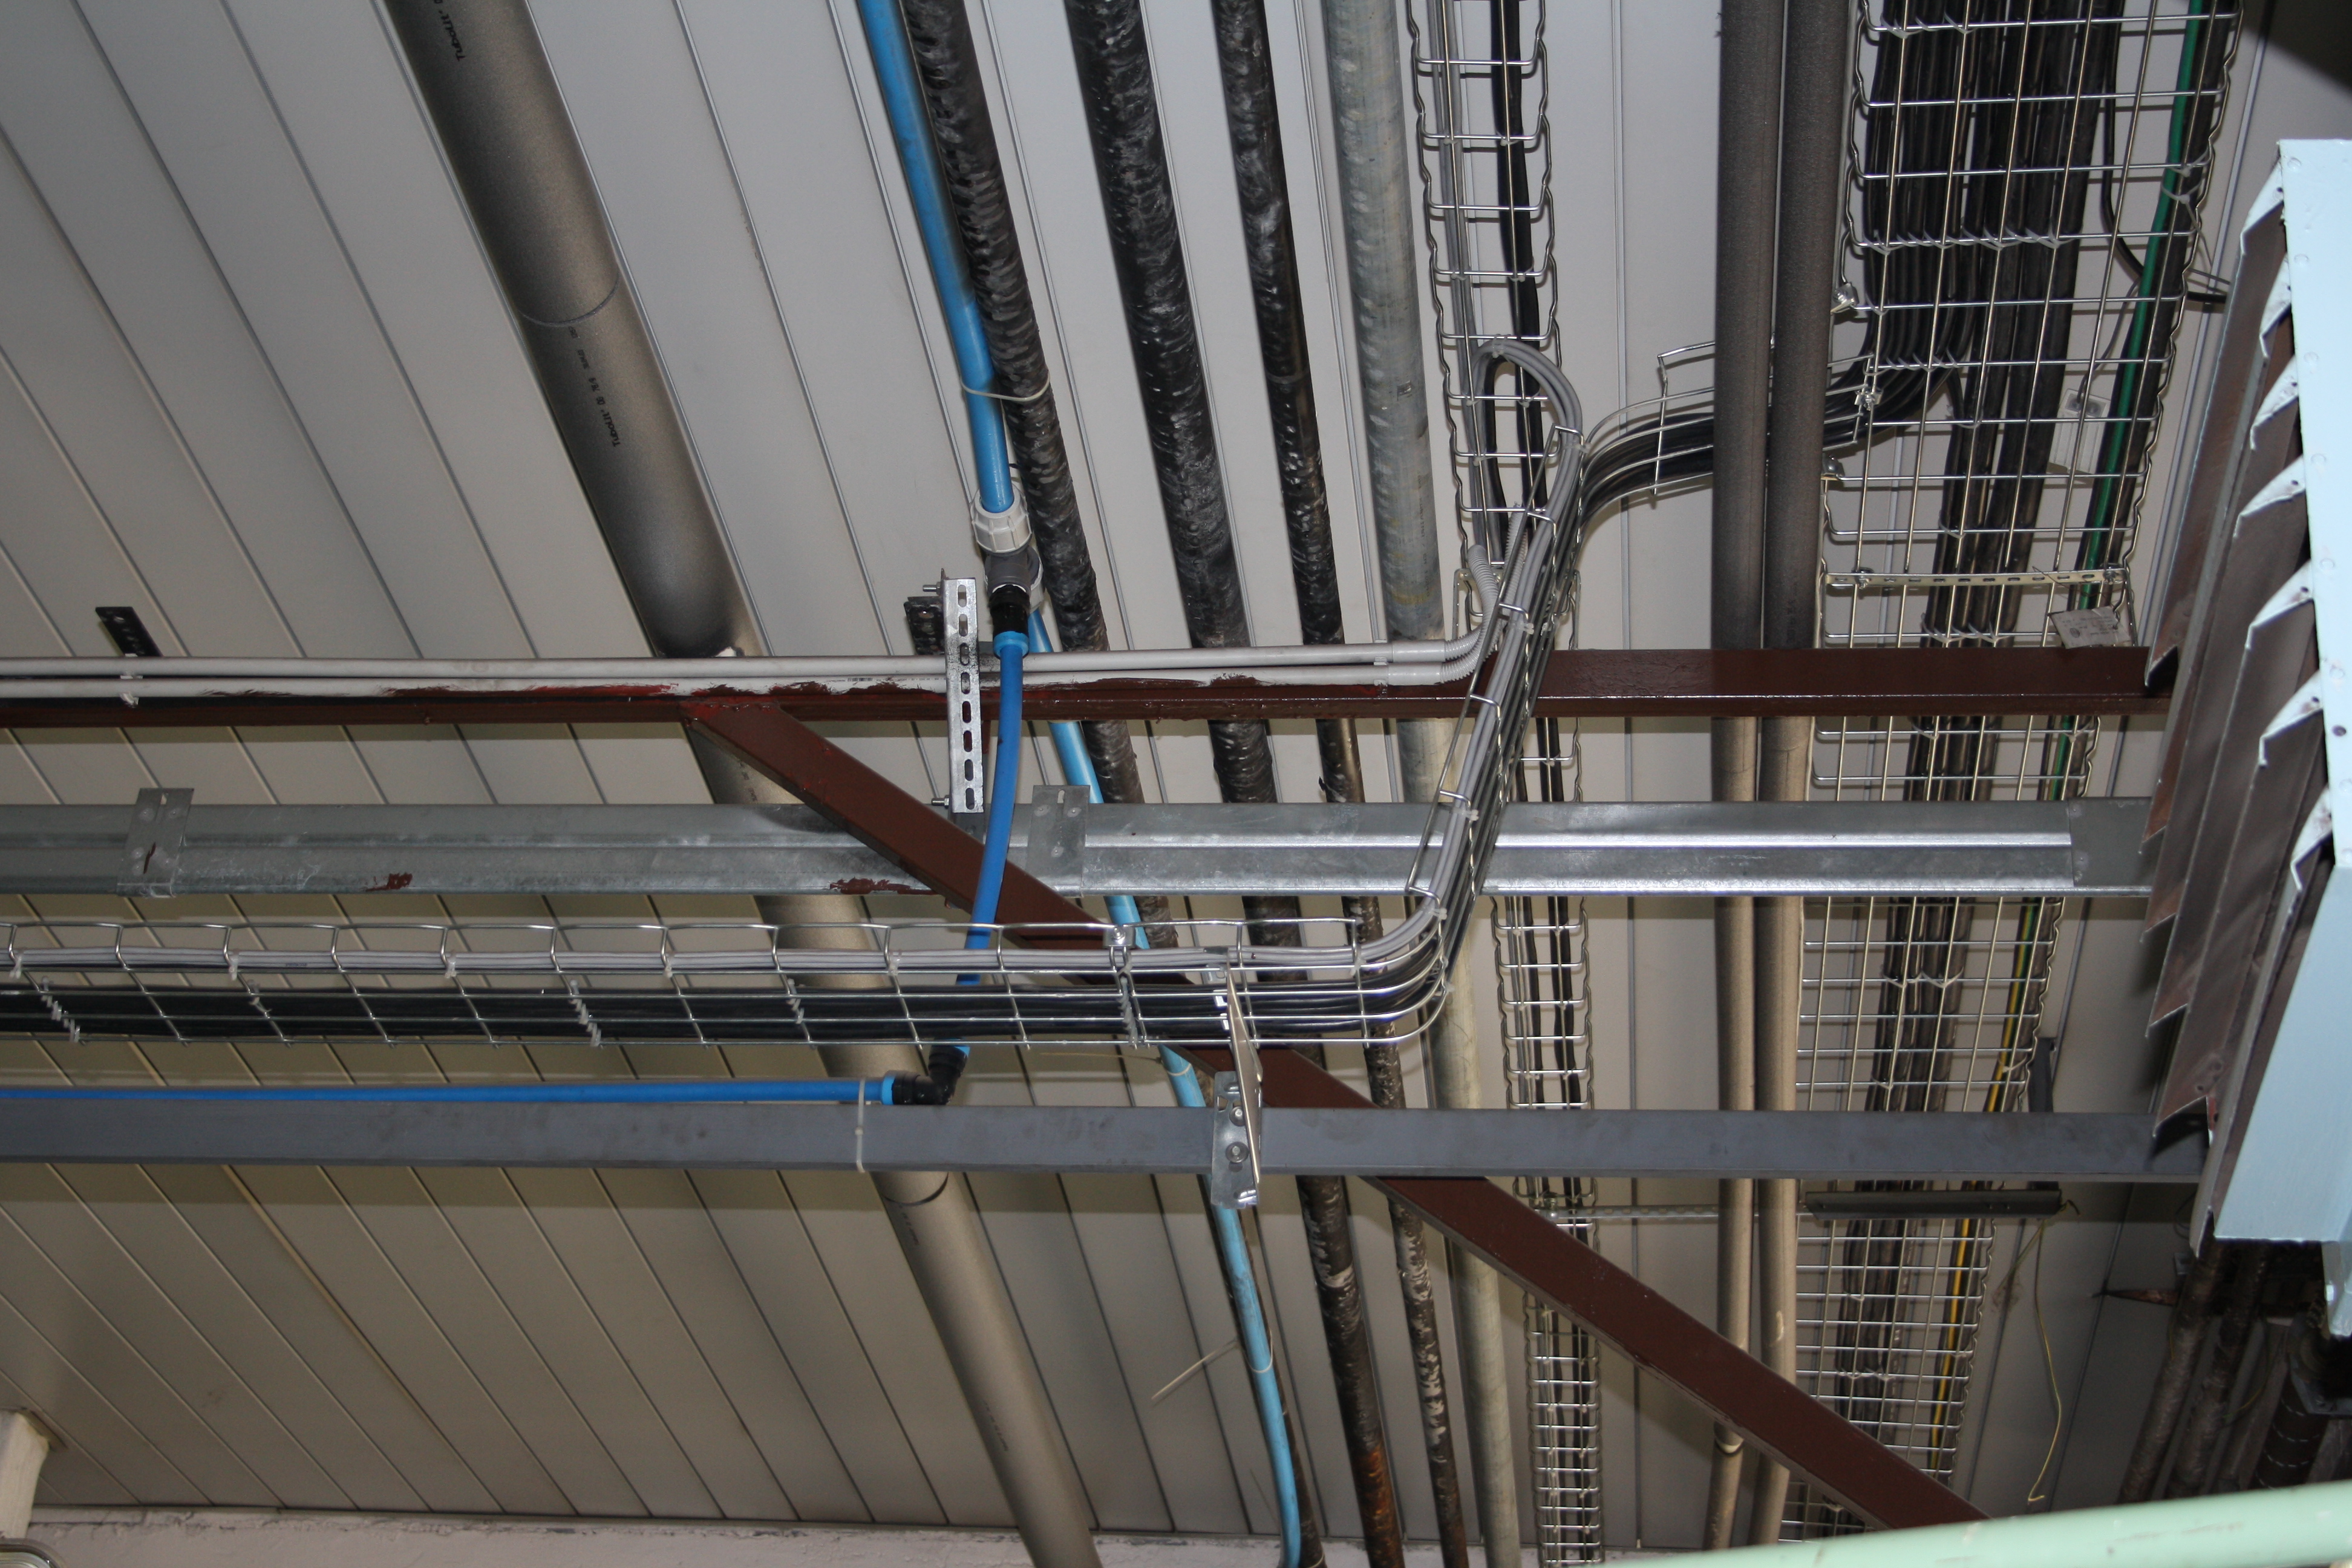 File:Cable tray with cables 20170514.jpg - Wikimedia Commons